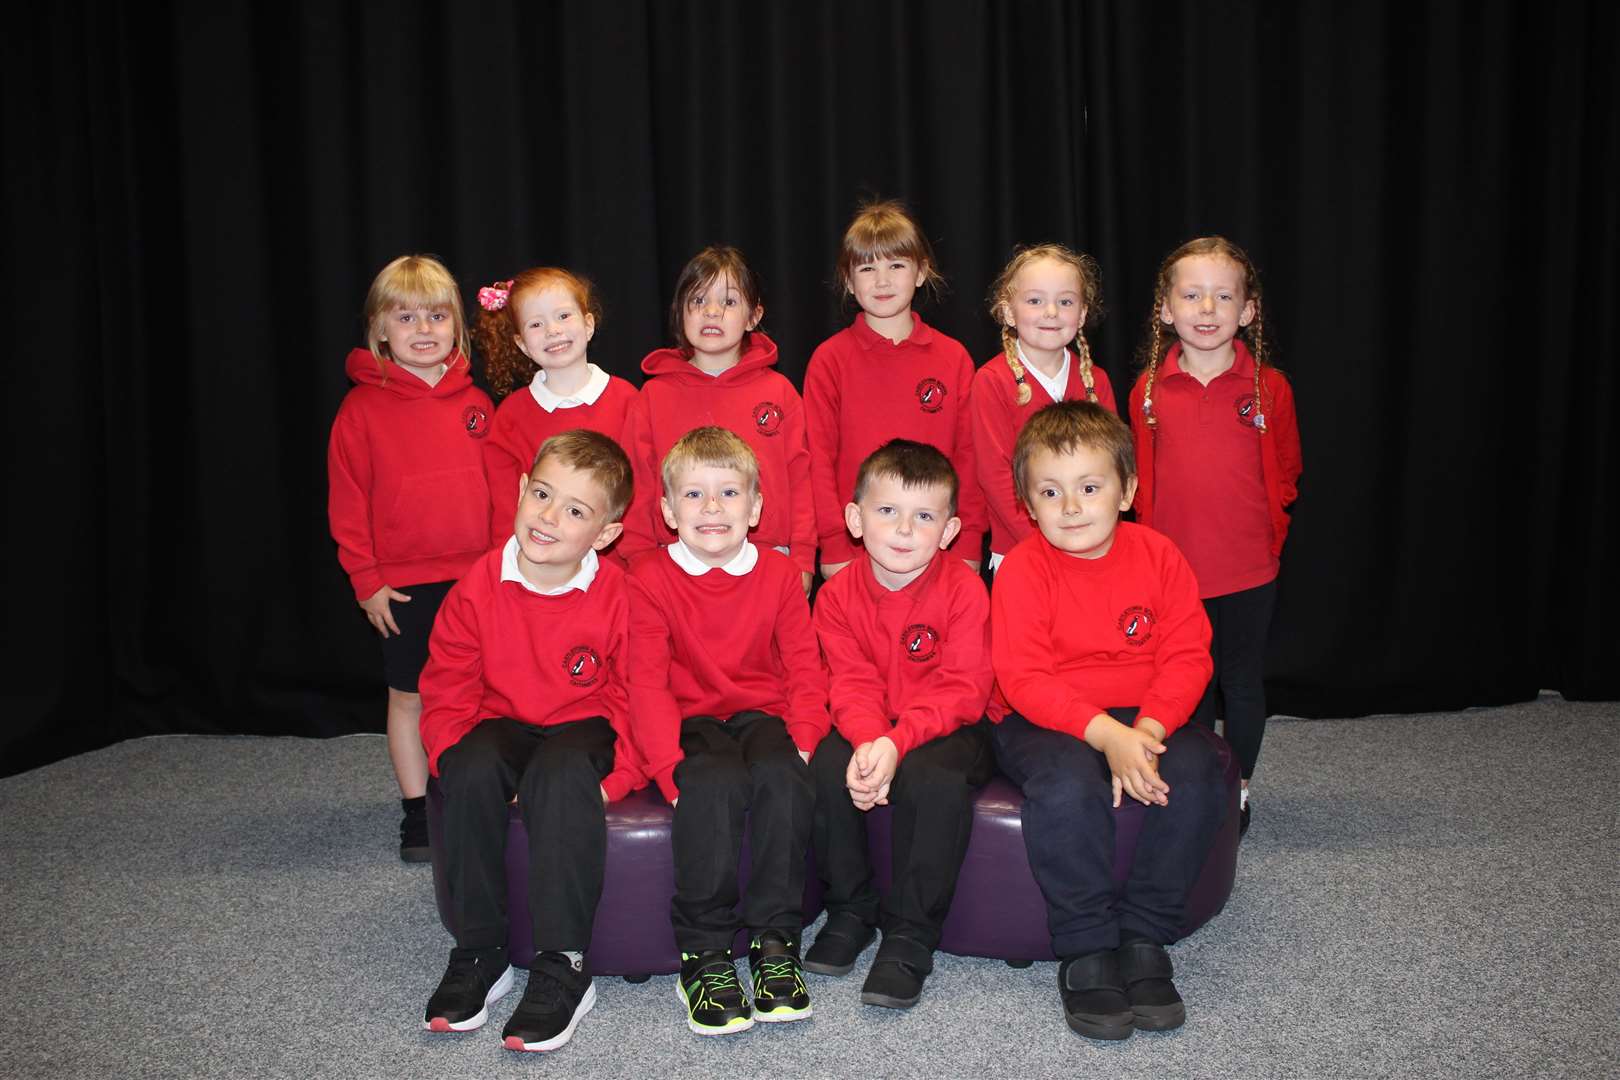 The new Primary 1 class at Castletown Primary.